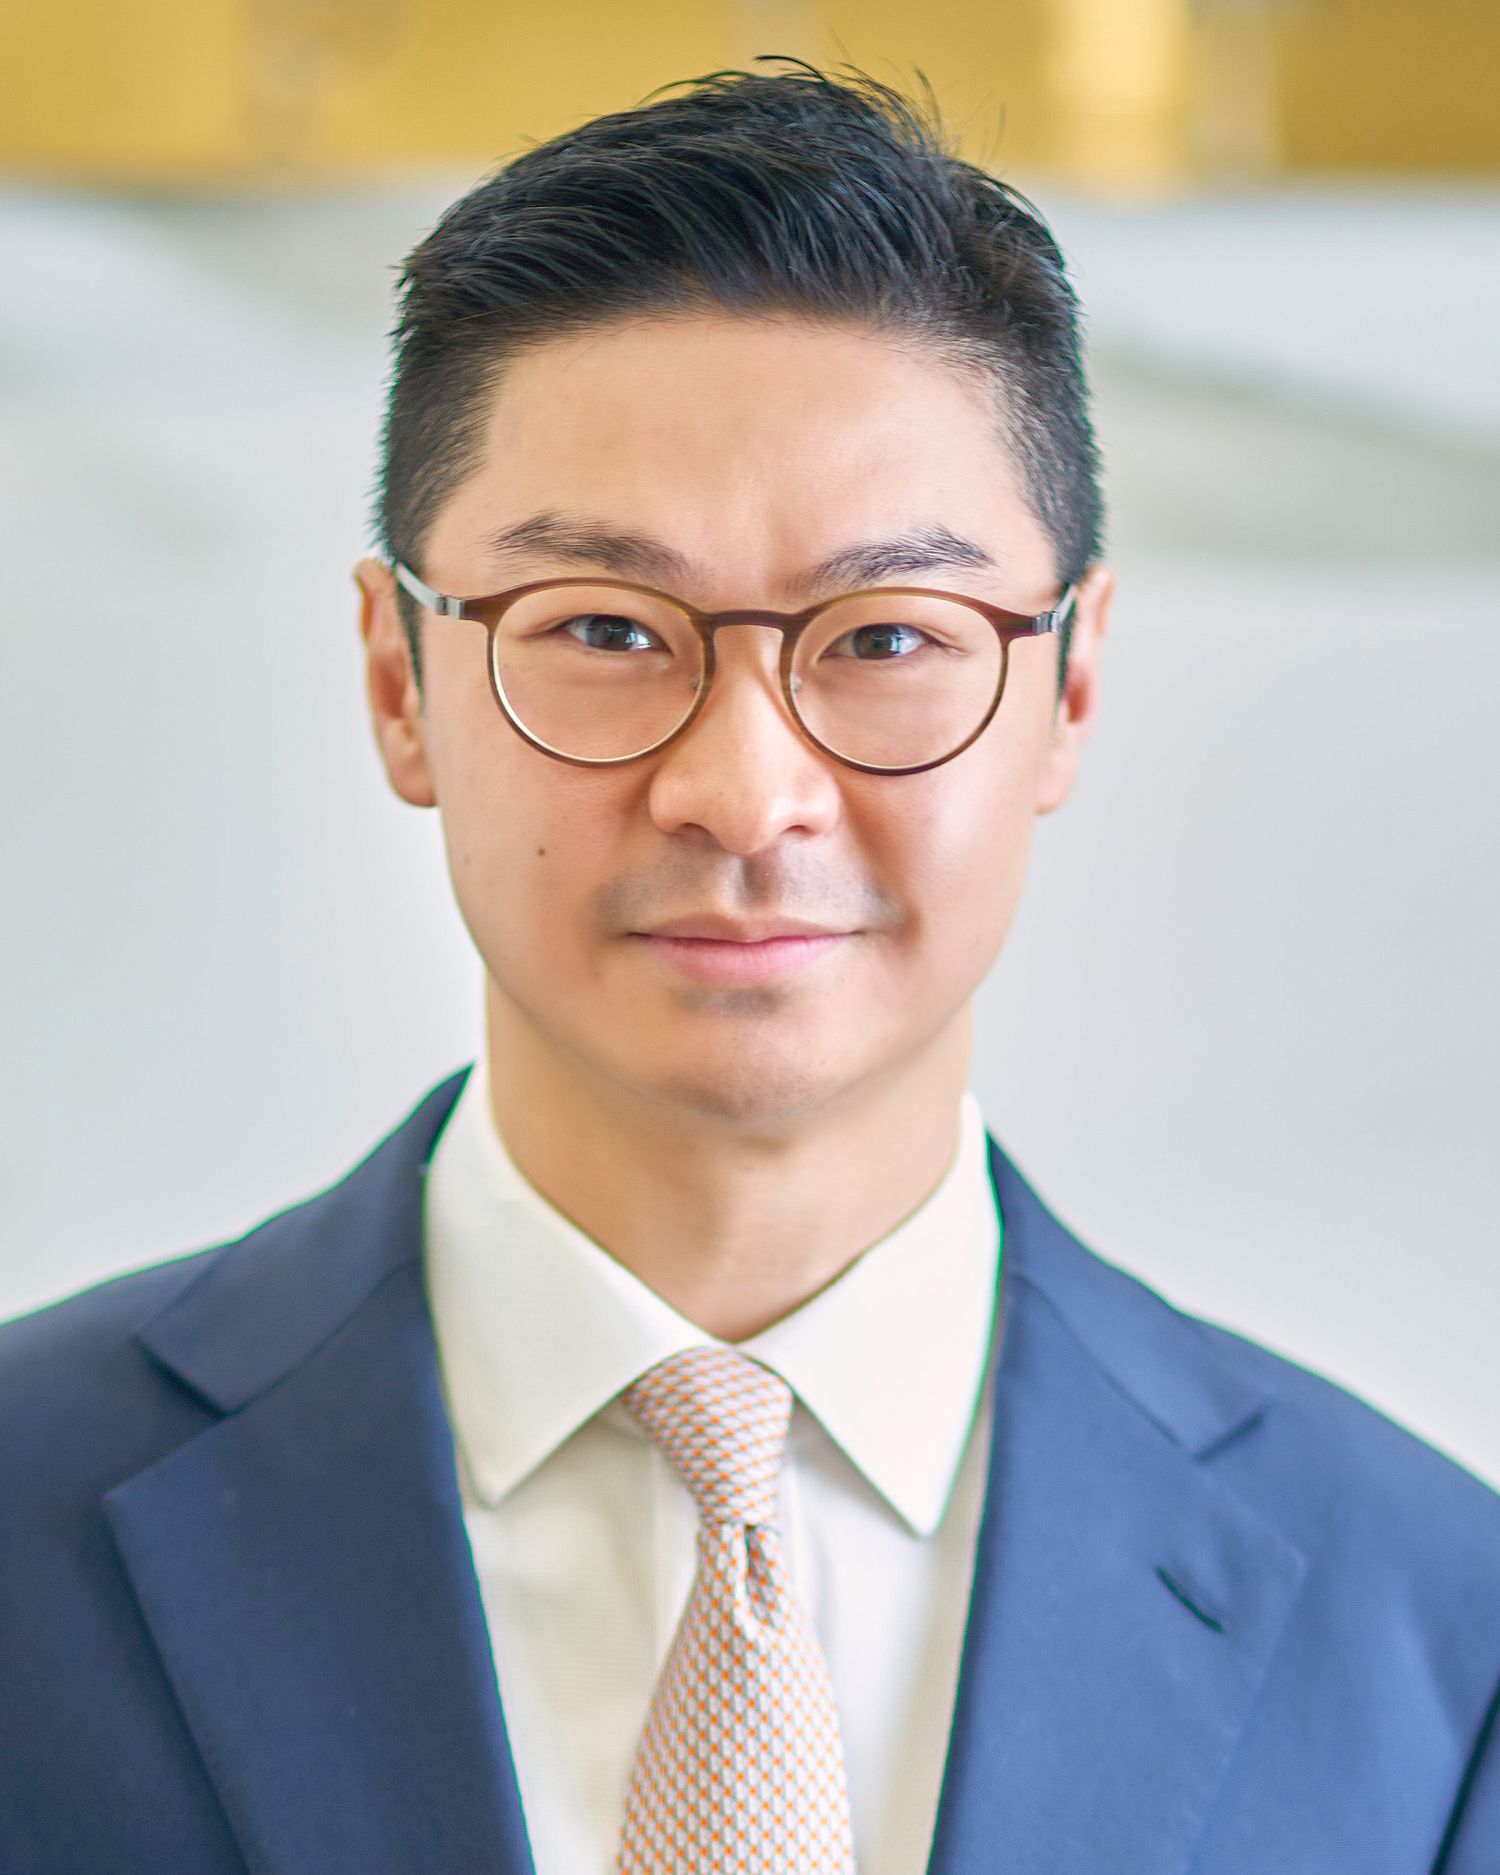 Dividend paying stock investor Ronald Chan founded Chartwell Capital in 2007 and currently serves as Chief Investment Officer and Co-Portfolio Manager.